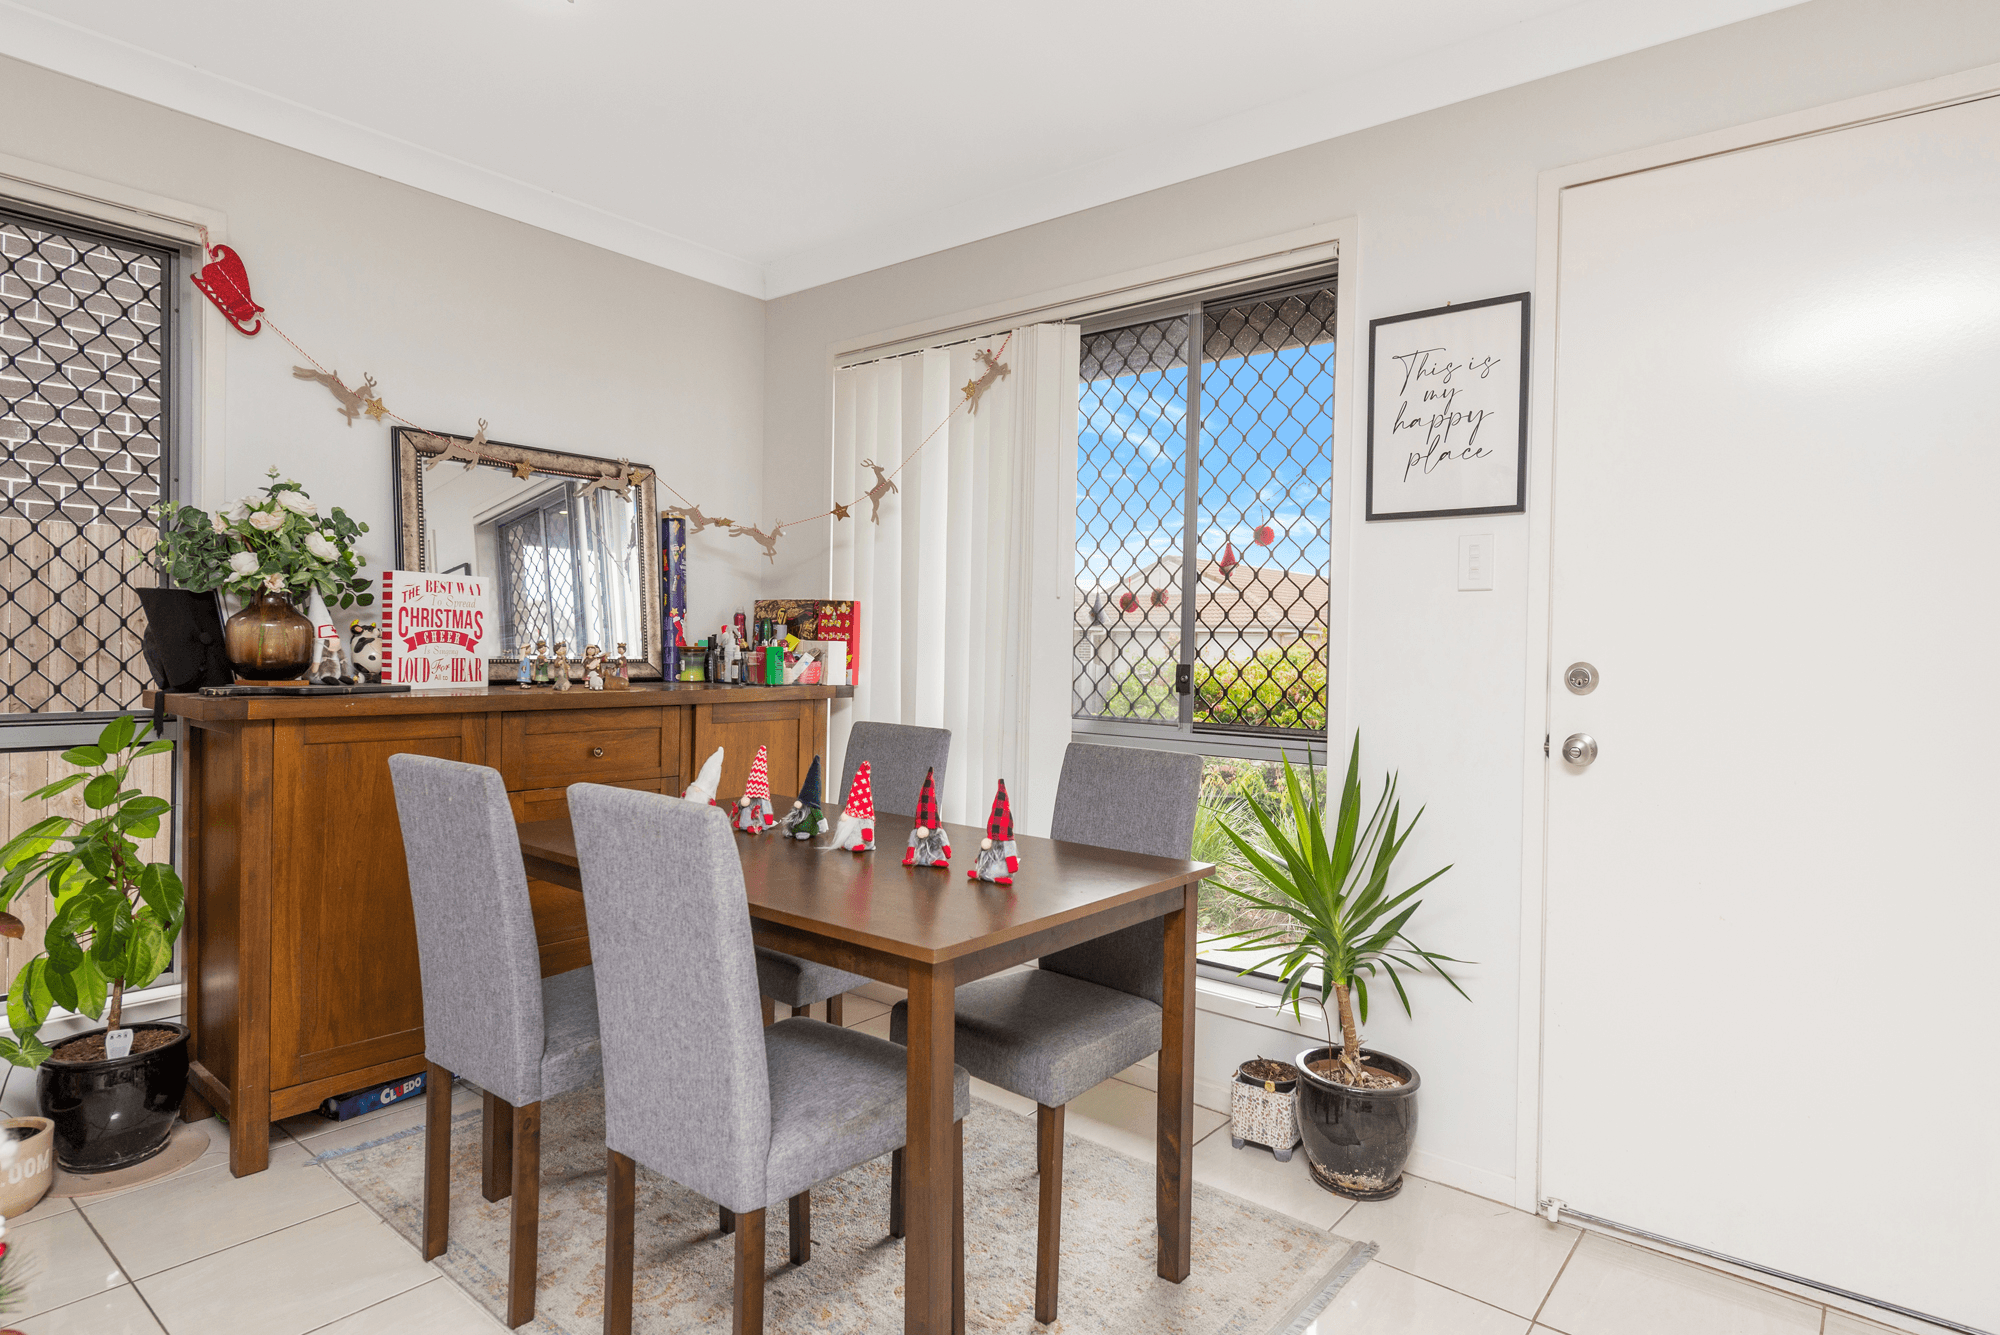 85/6-44 Clearwater Street, BETHANIA, QLD 4205